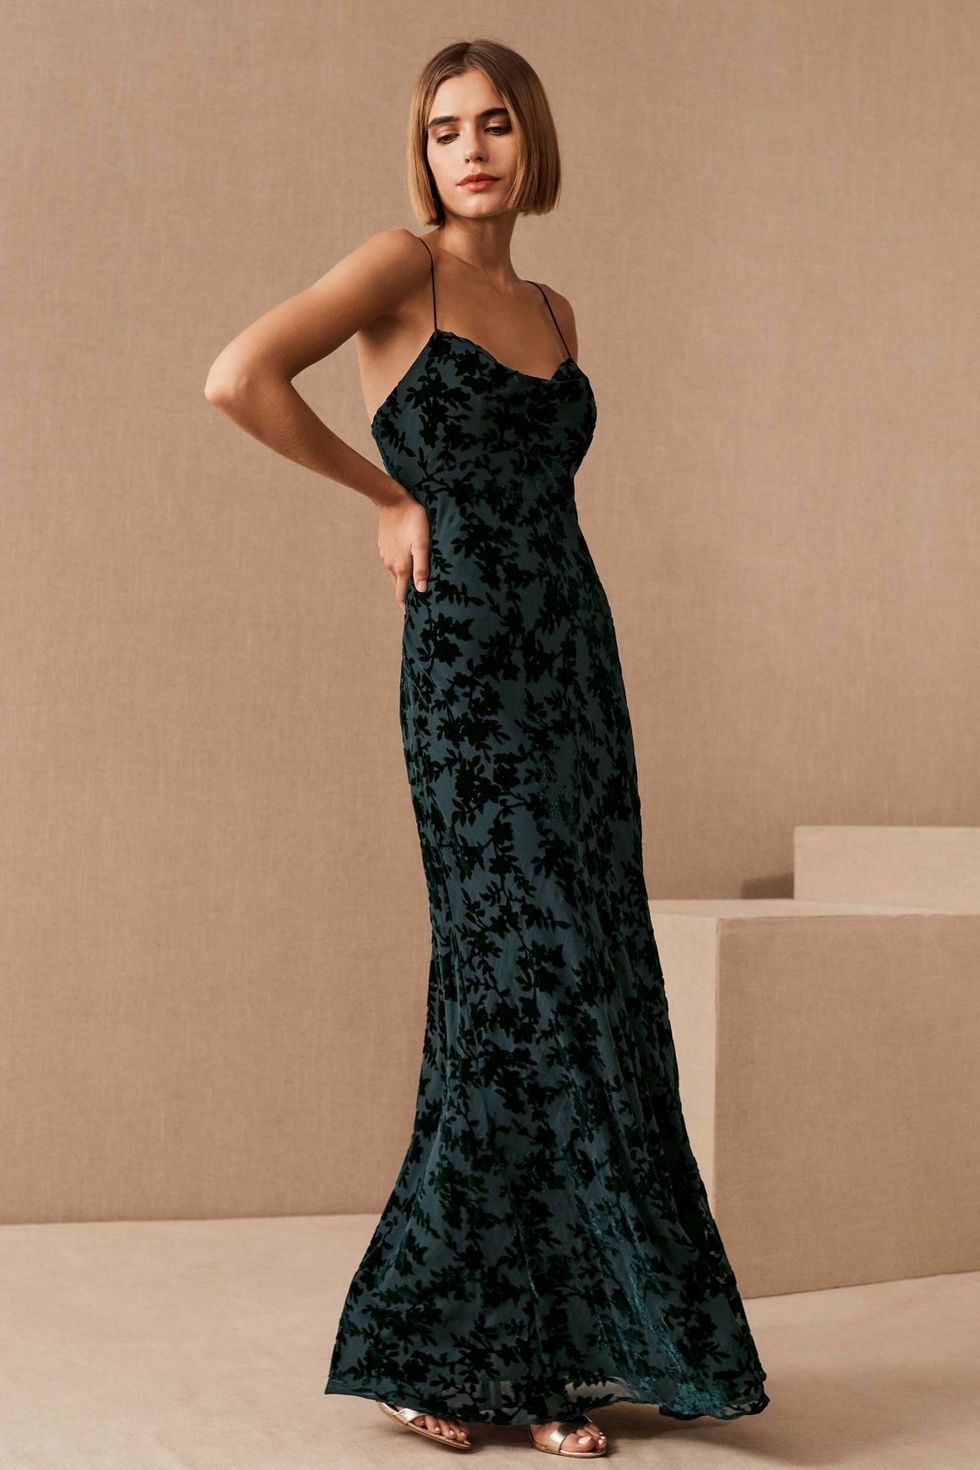 14 Best Winter Wedding Guest Dresses 2021- What to Wear to a